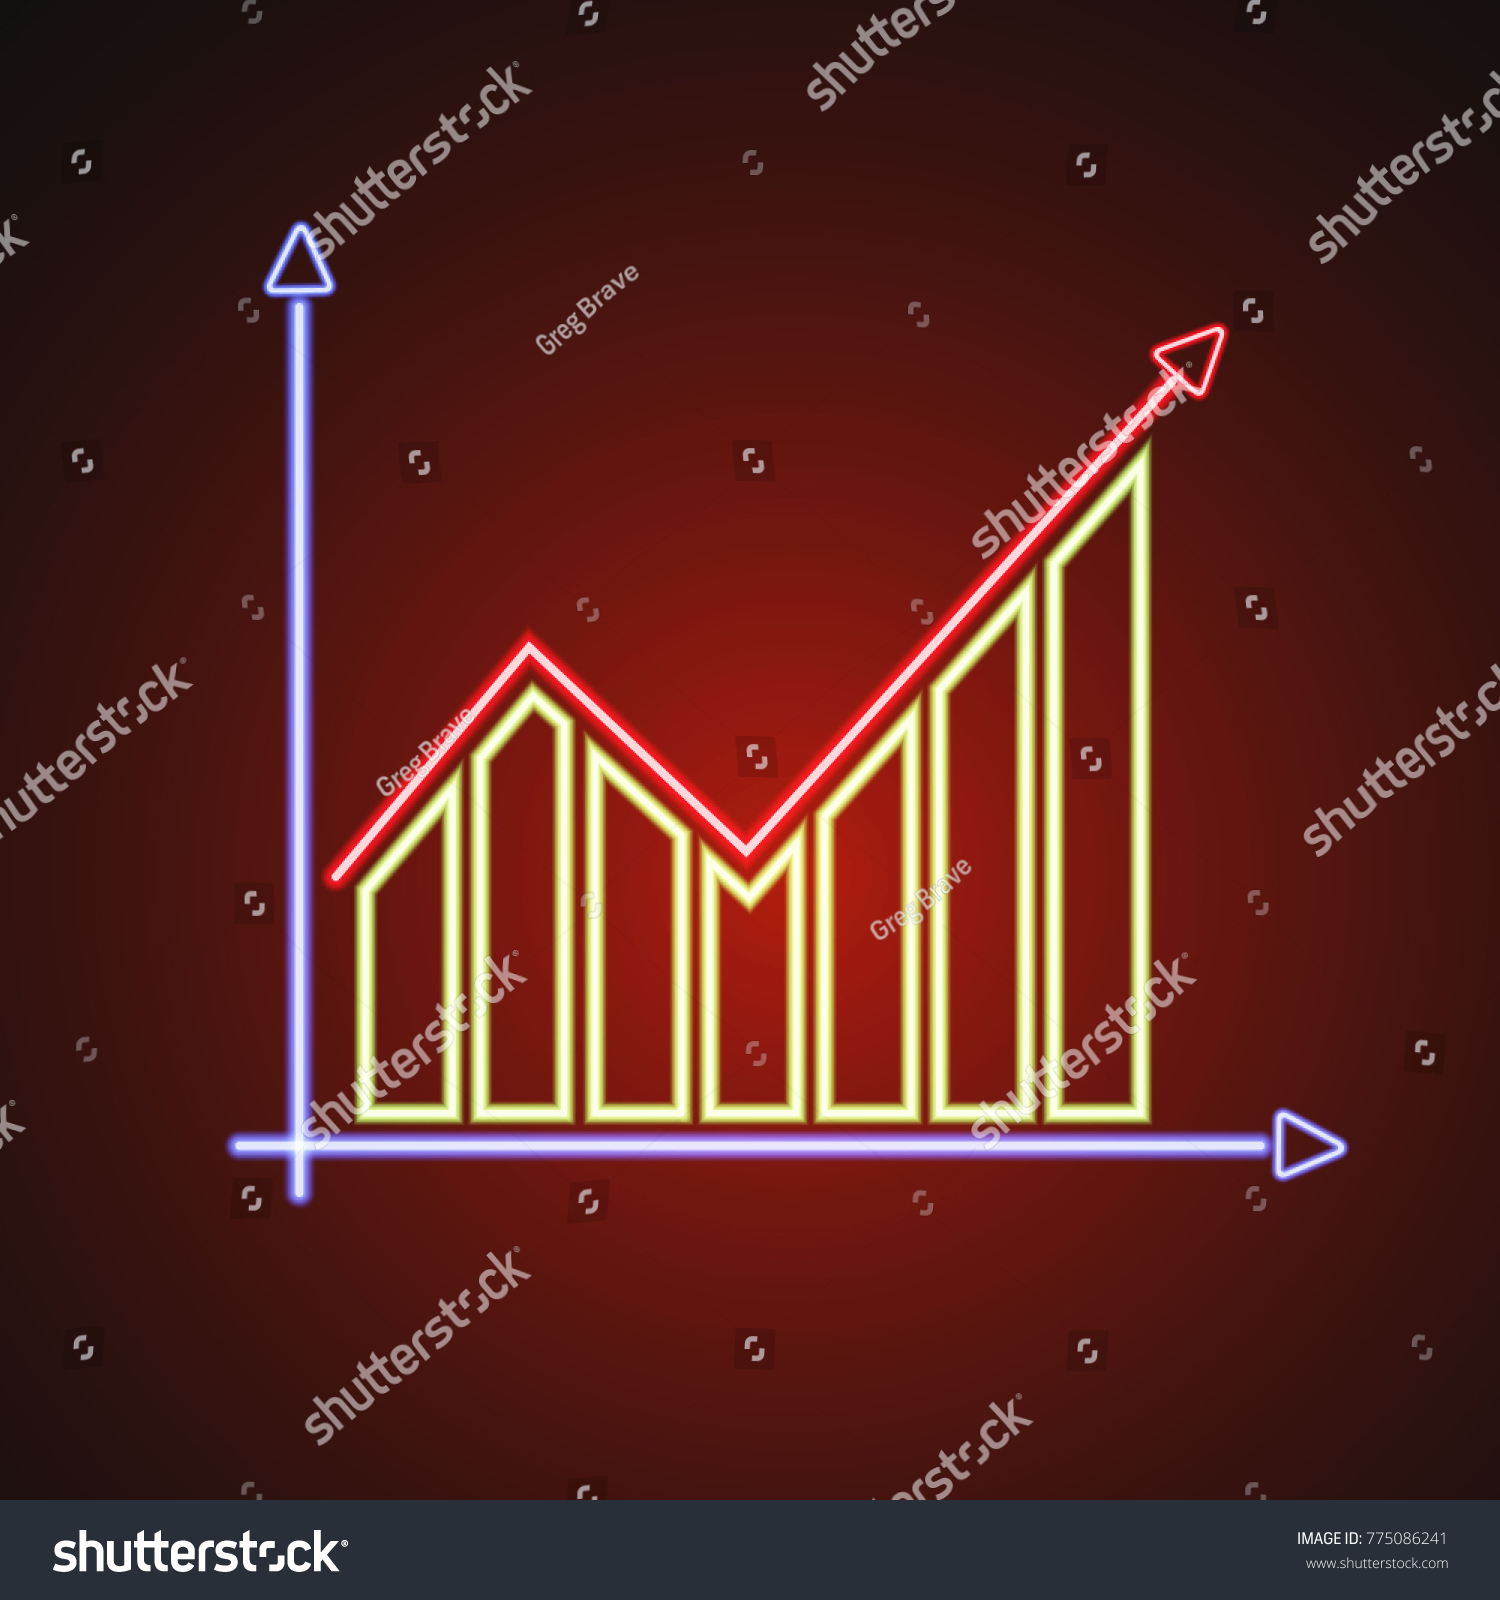 SVG of Financial graph stylized glowing neon illustration svg